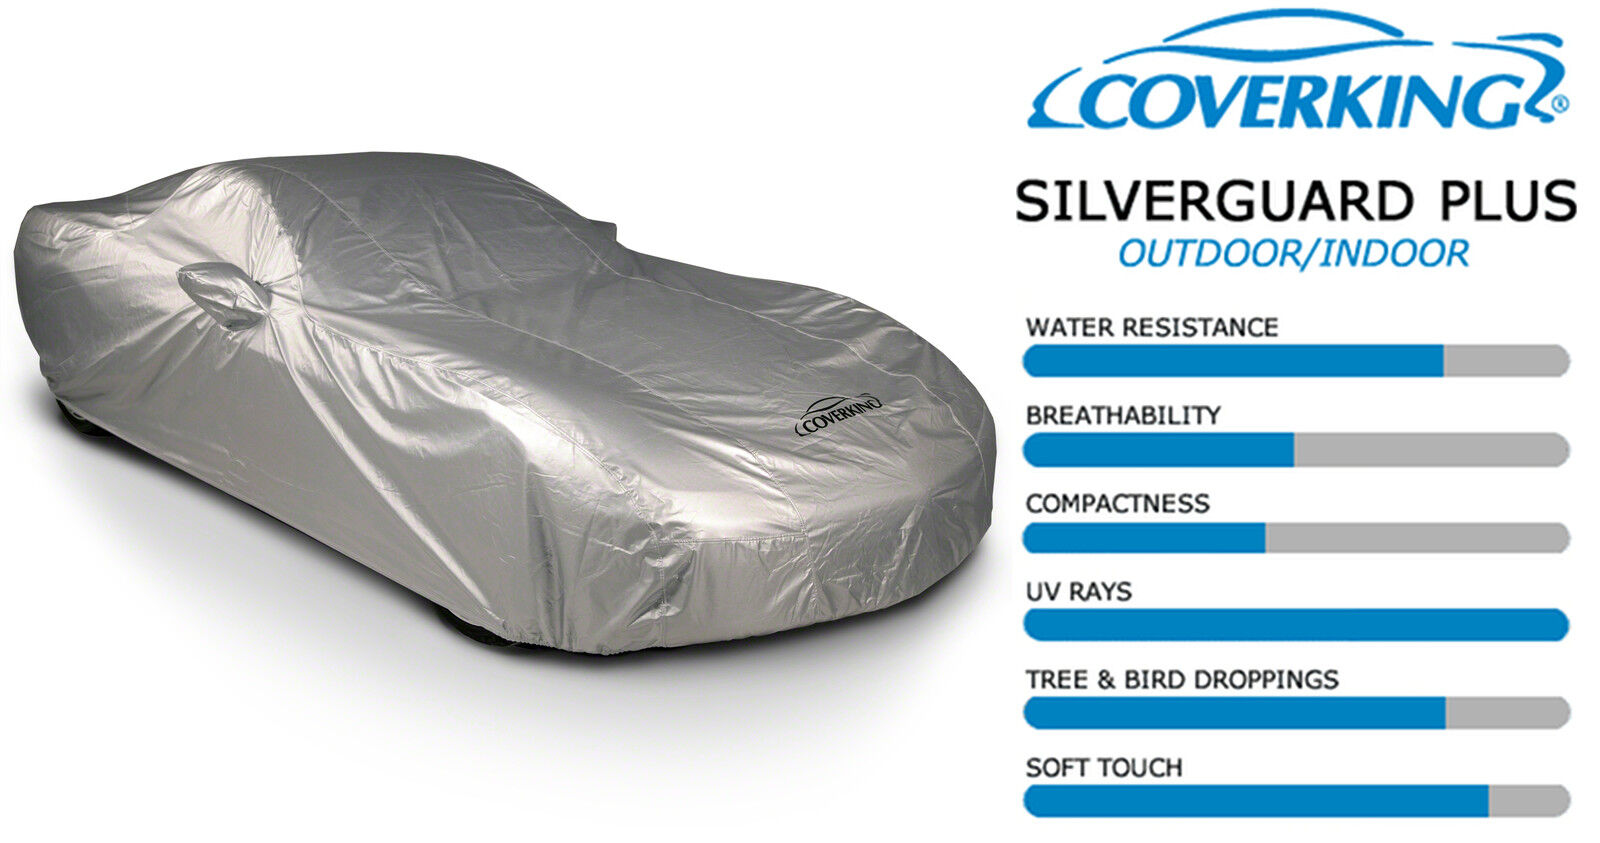 COVERKING SILVERGUARD PLUS all-weather CAR COVER made for 2004-2006 Pontiac GTO